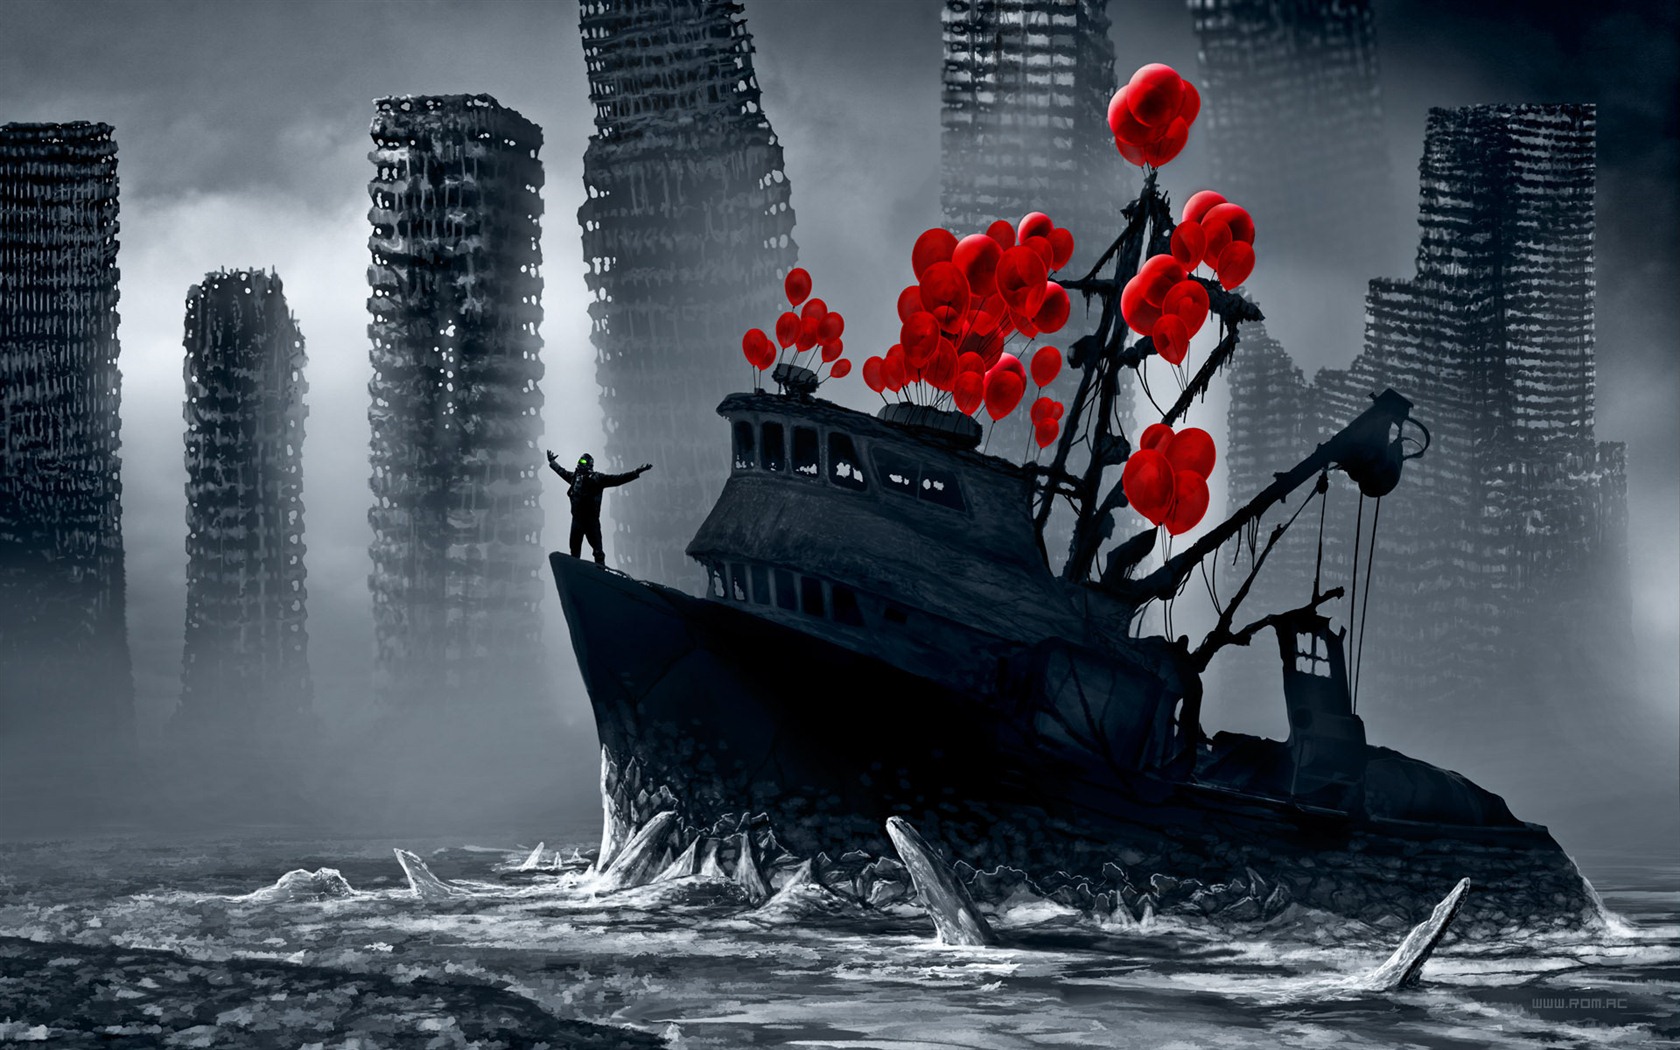 Romantically Apocalyptic creative painting wallpapers (2) #19 - 1680x1050